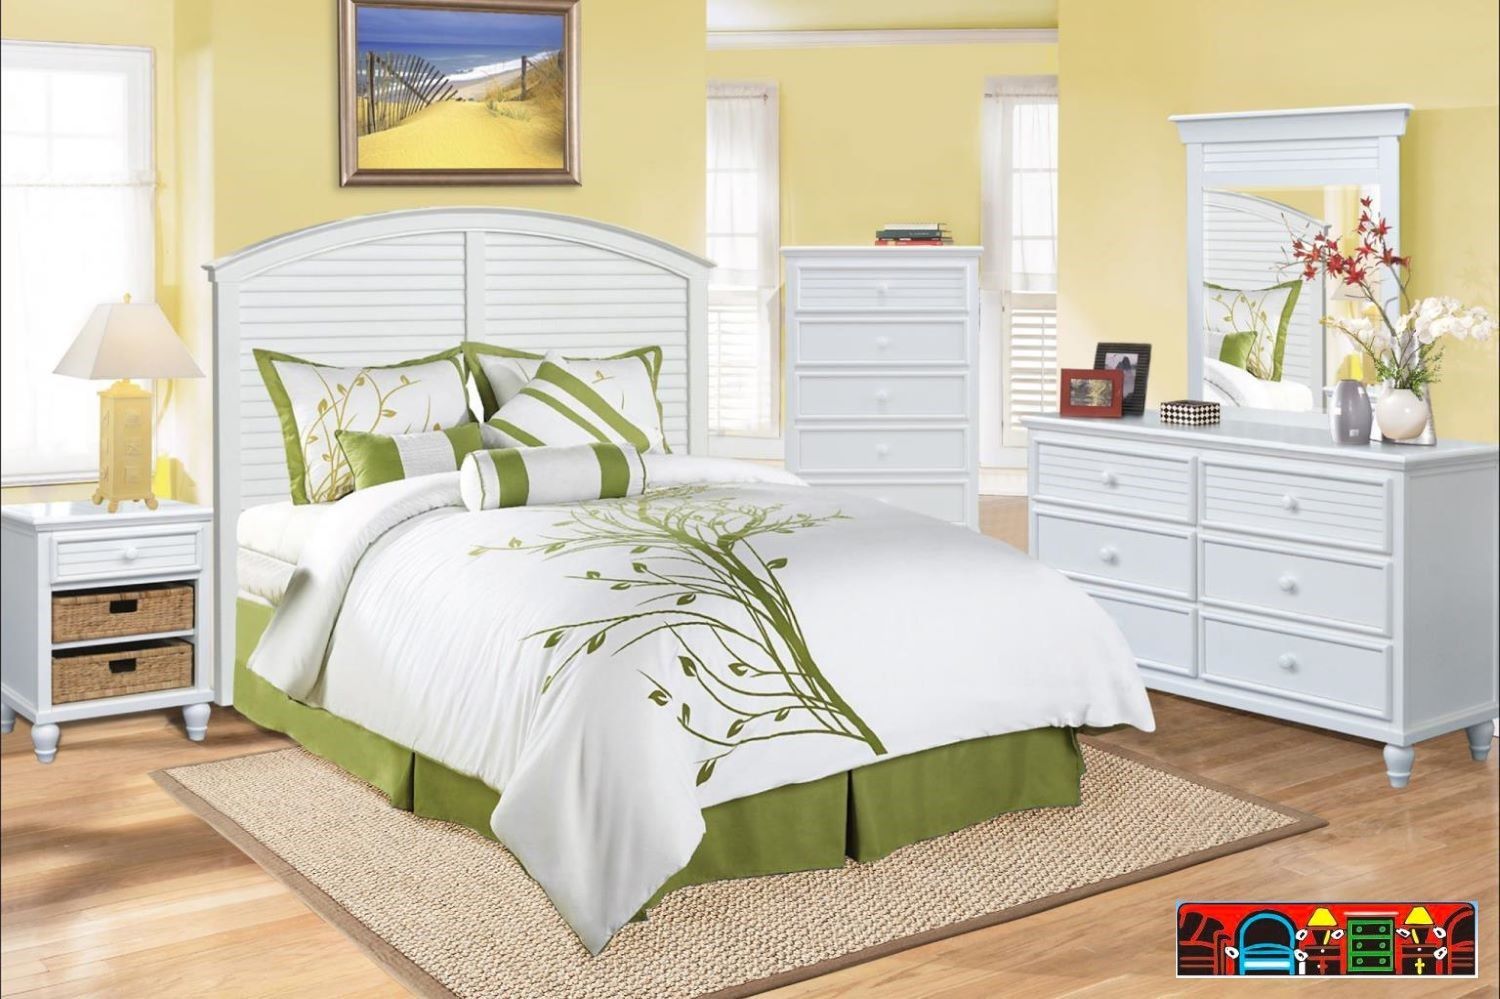 Sunset bedroom set, crafted from solid wood, featuring a white finish, an arched headboard, and louver accents.